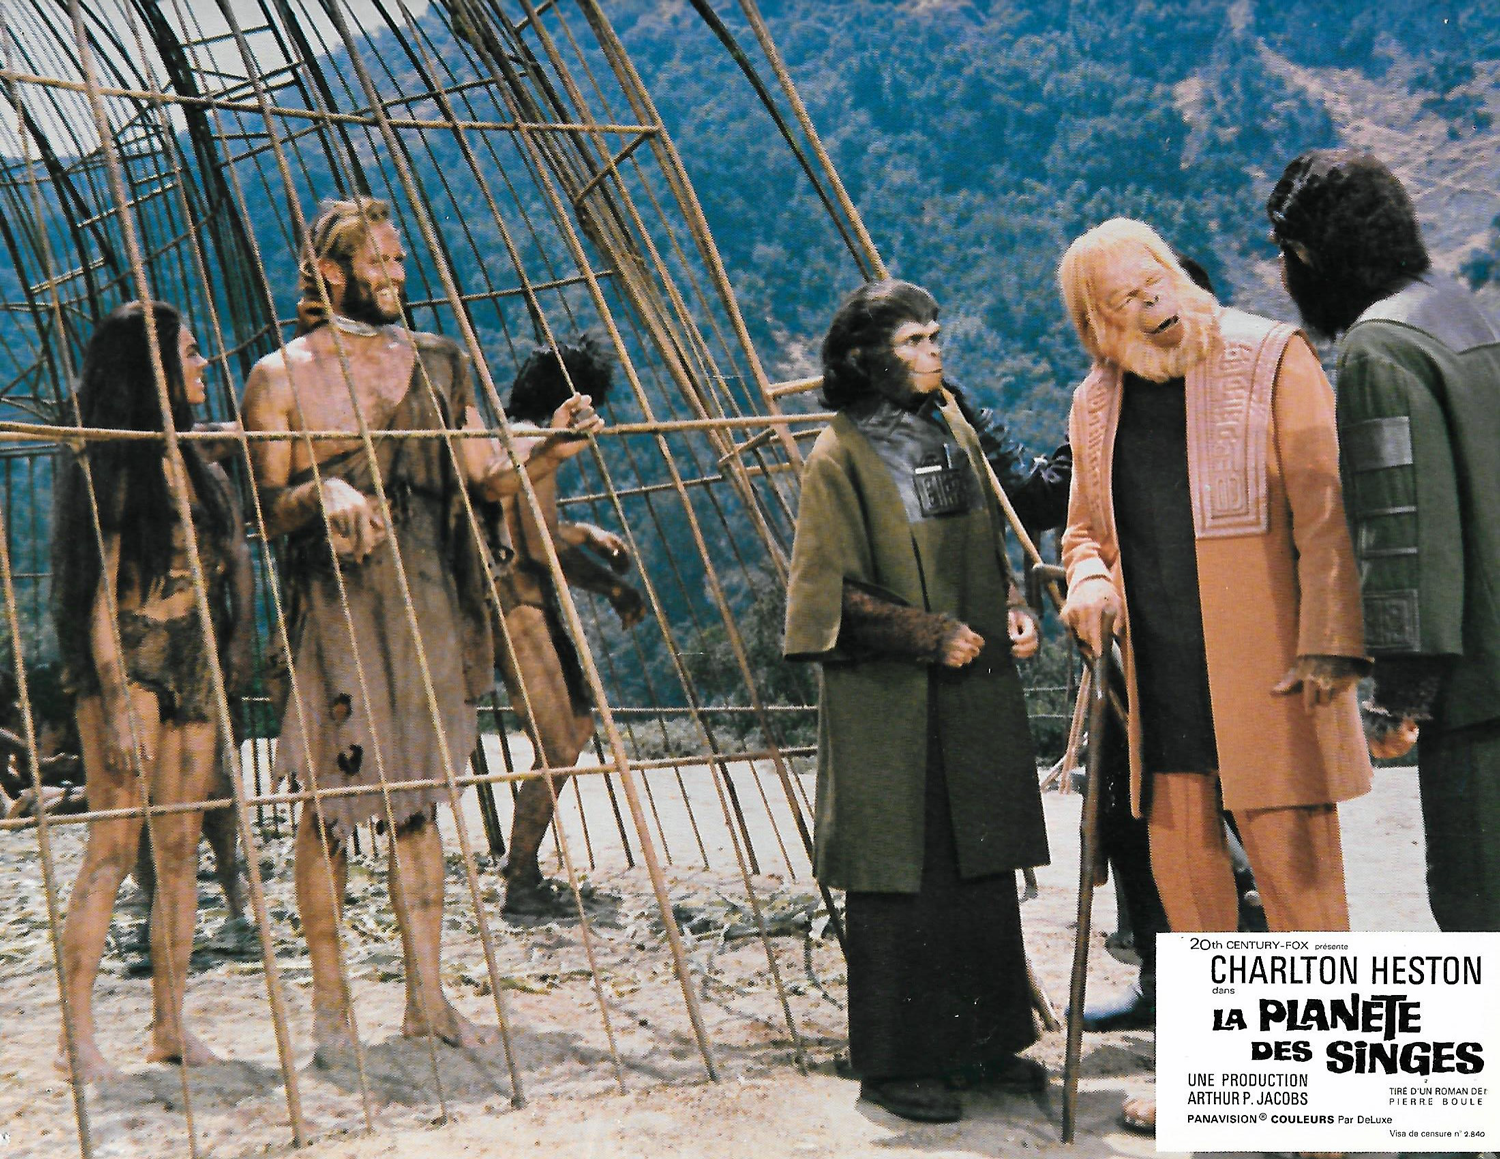  In this French lobby card, sympathetic chimpanzees Dr. Zira (Kim Hunter) and Dr. Cornelius (Roddy McDowall) bring Dr. Zaius (Maurice Evans) to see the human (Charlton Heston) they call “Bright Eyes”, who appears to be much more intelligent than the 